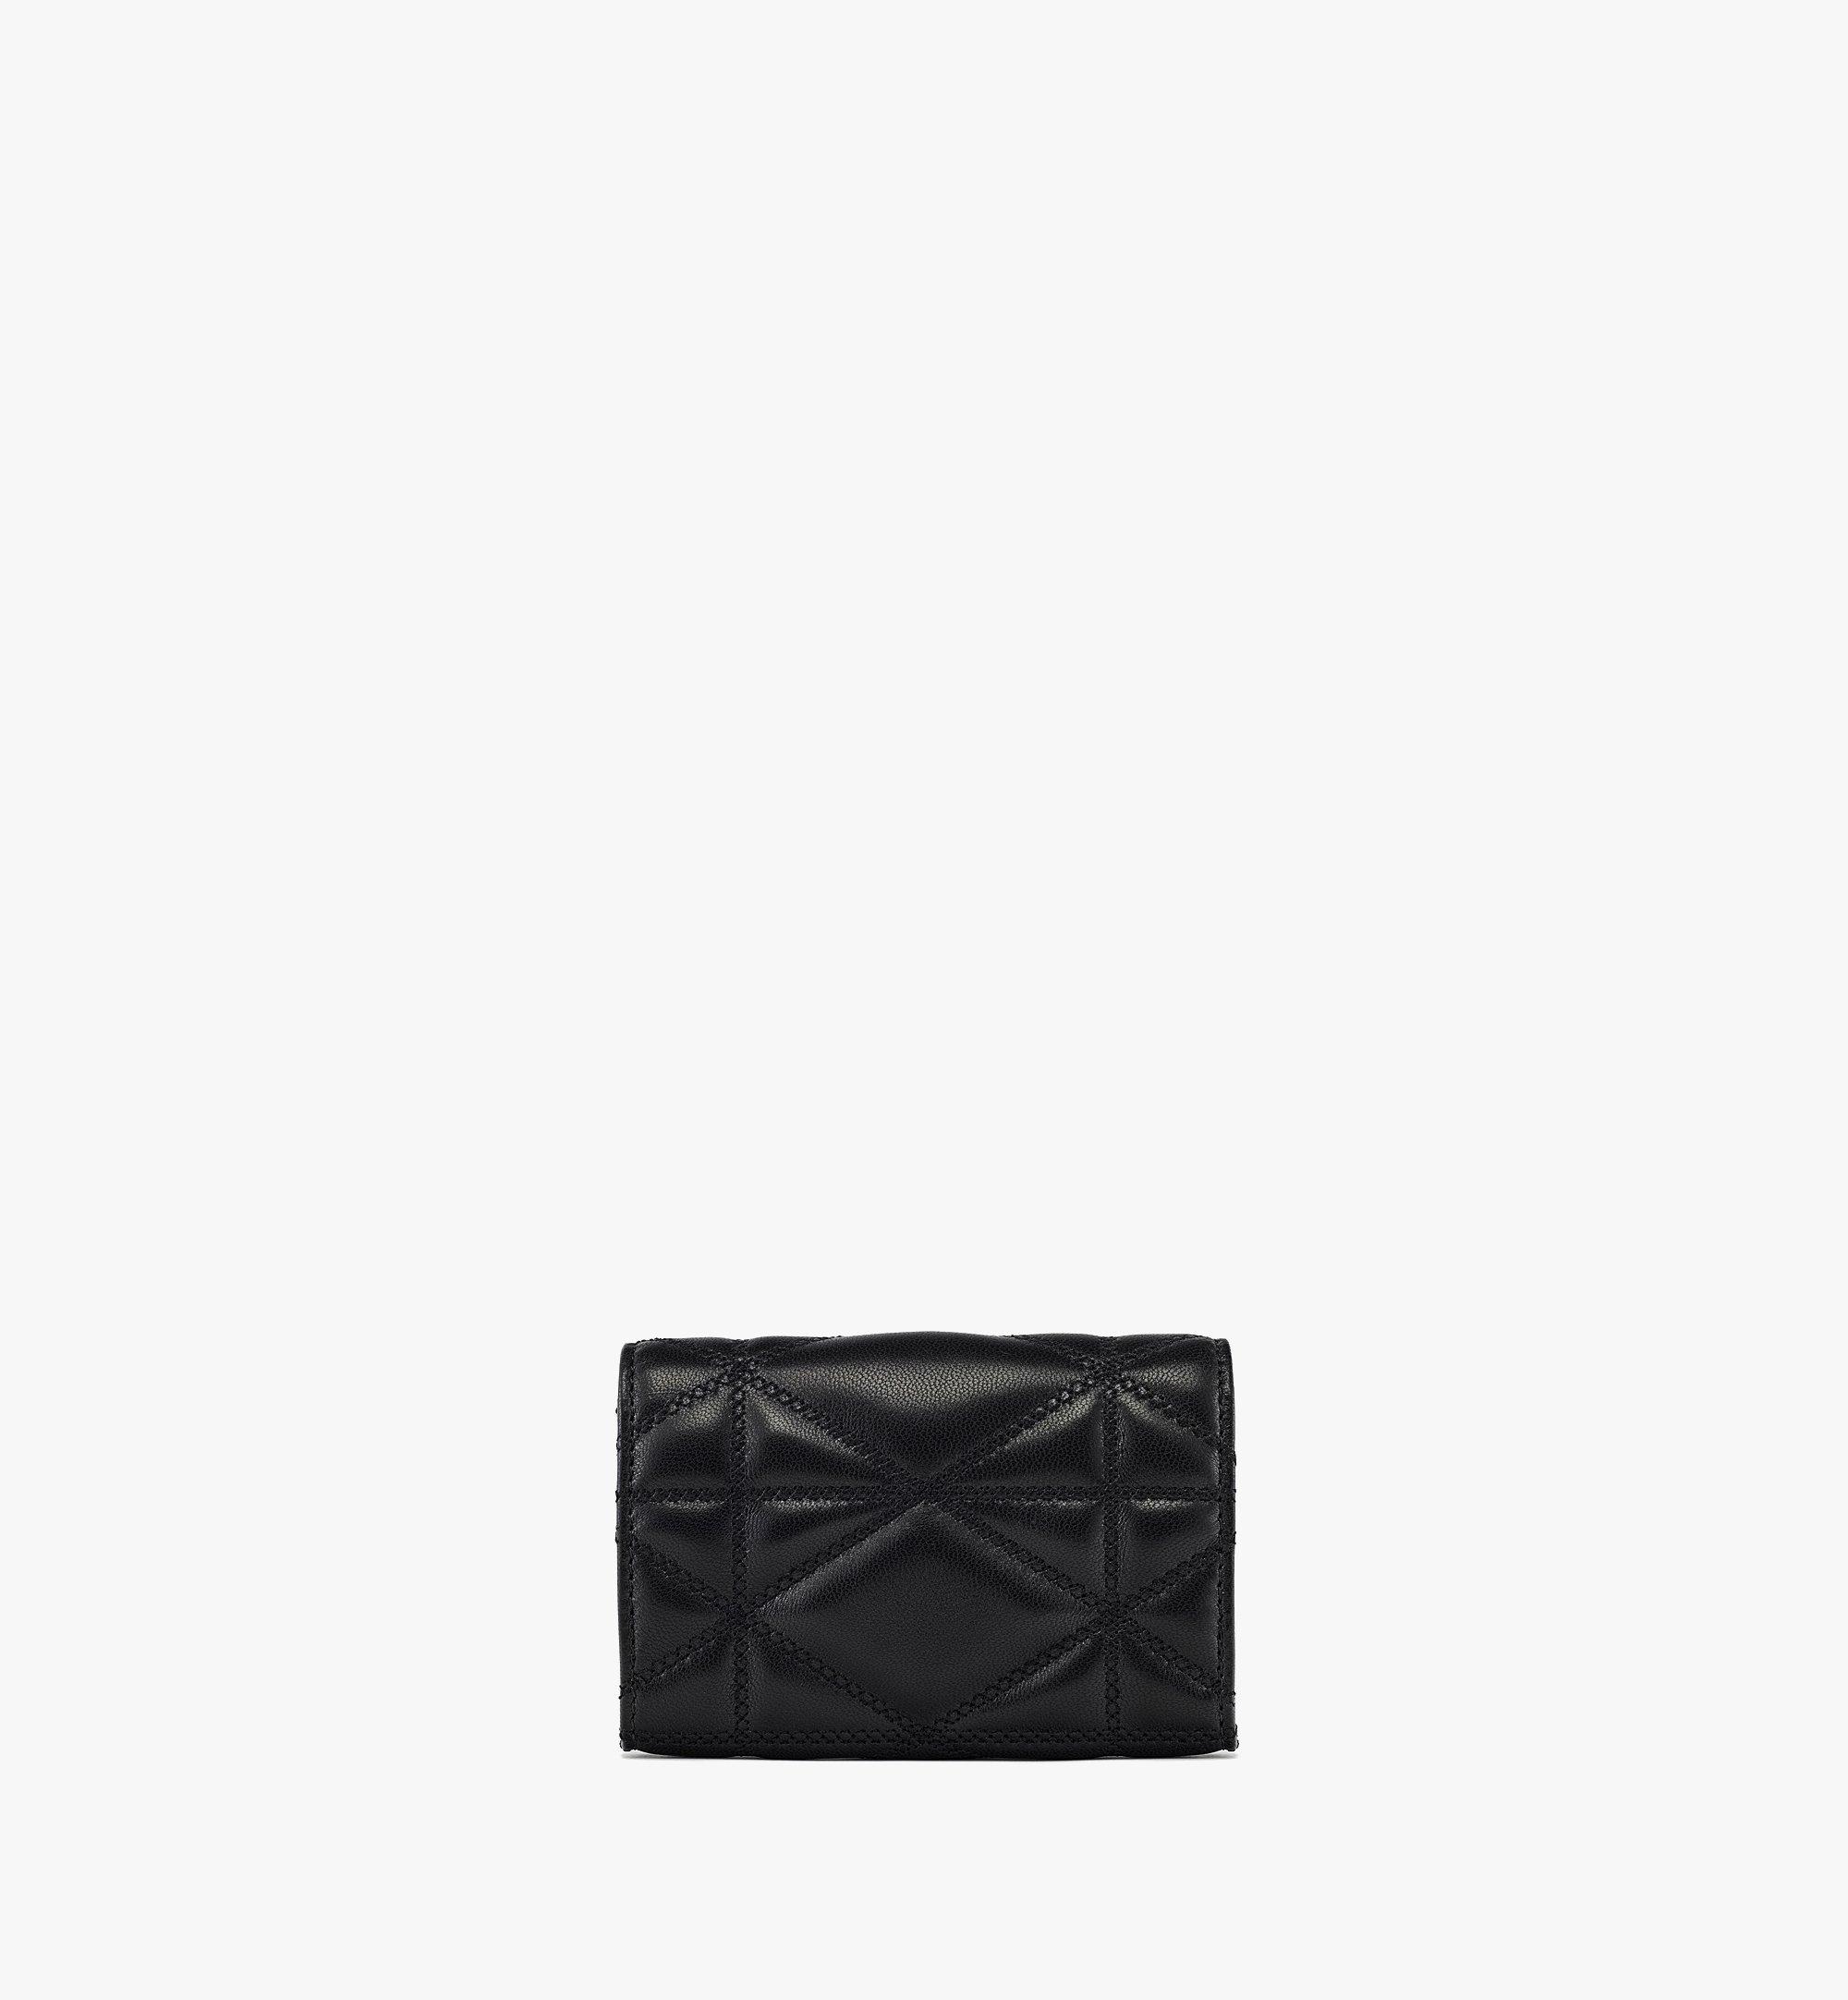 MCM Travia Card Case in Cloud Quilted Leather Black MYADSLM01BK001 Alternate View 2